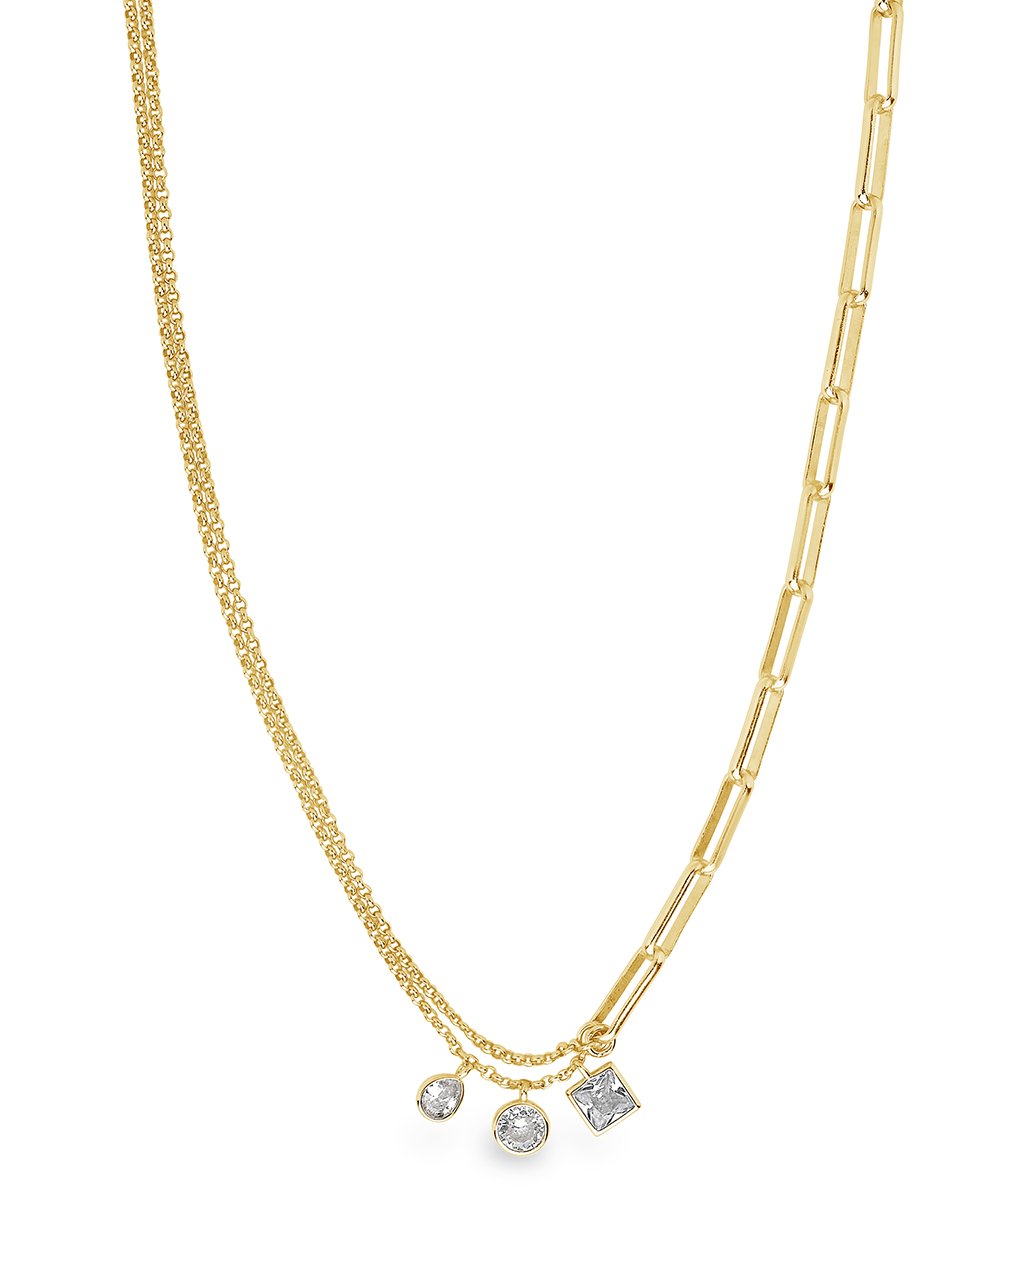 Delicate Link Necklace with CZ Charms Necklace Sterling Forever Gold 